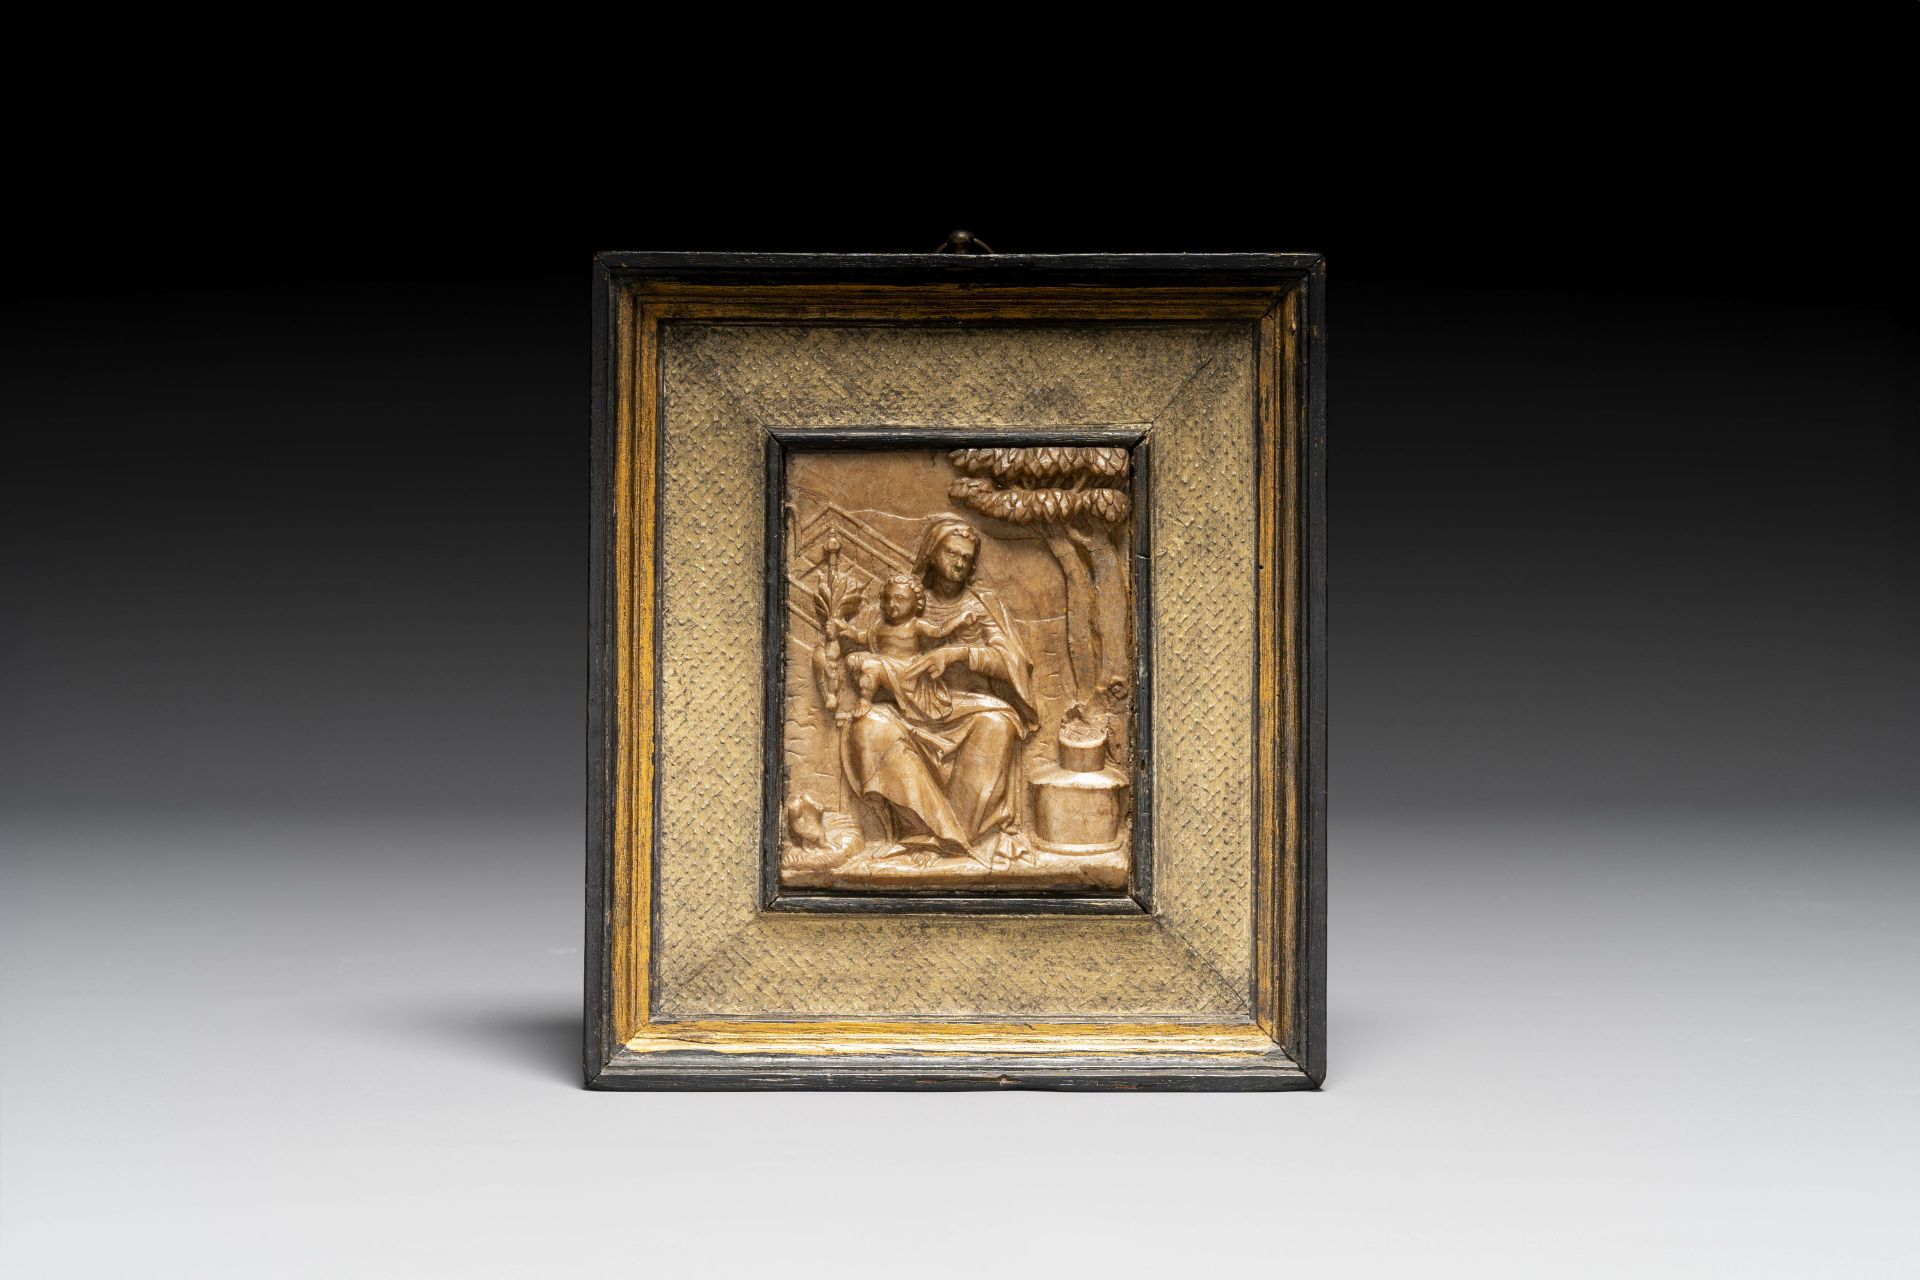 A Malines alabaster relief with Mary and child, 16/17th century